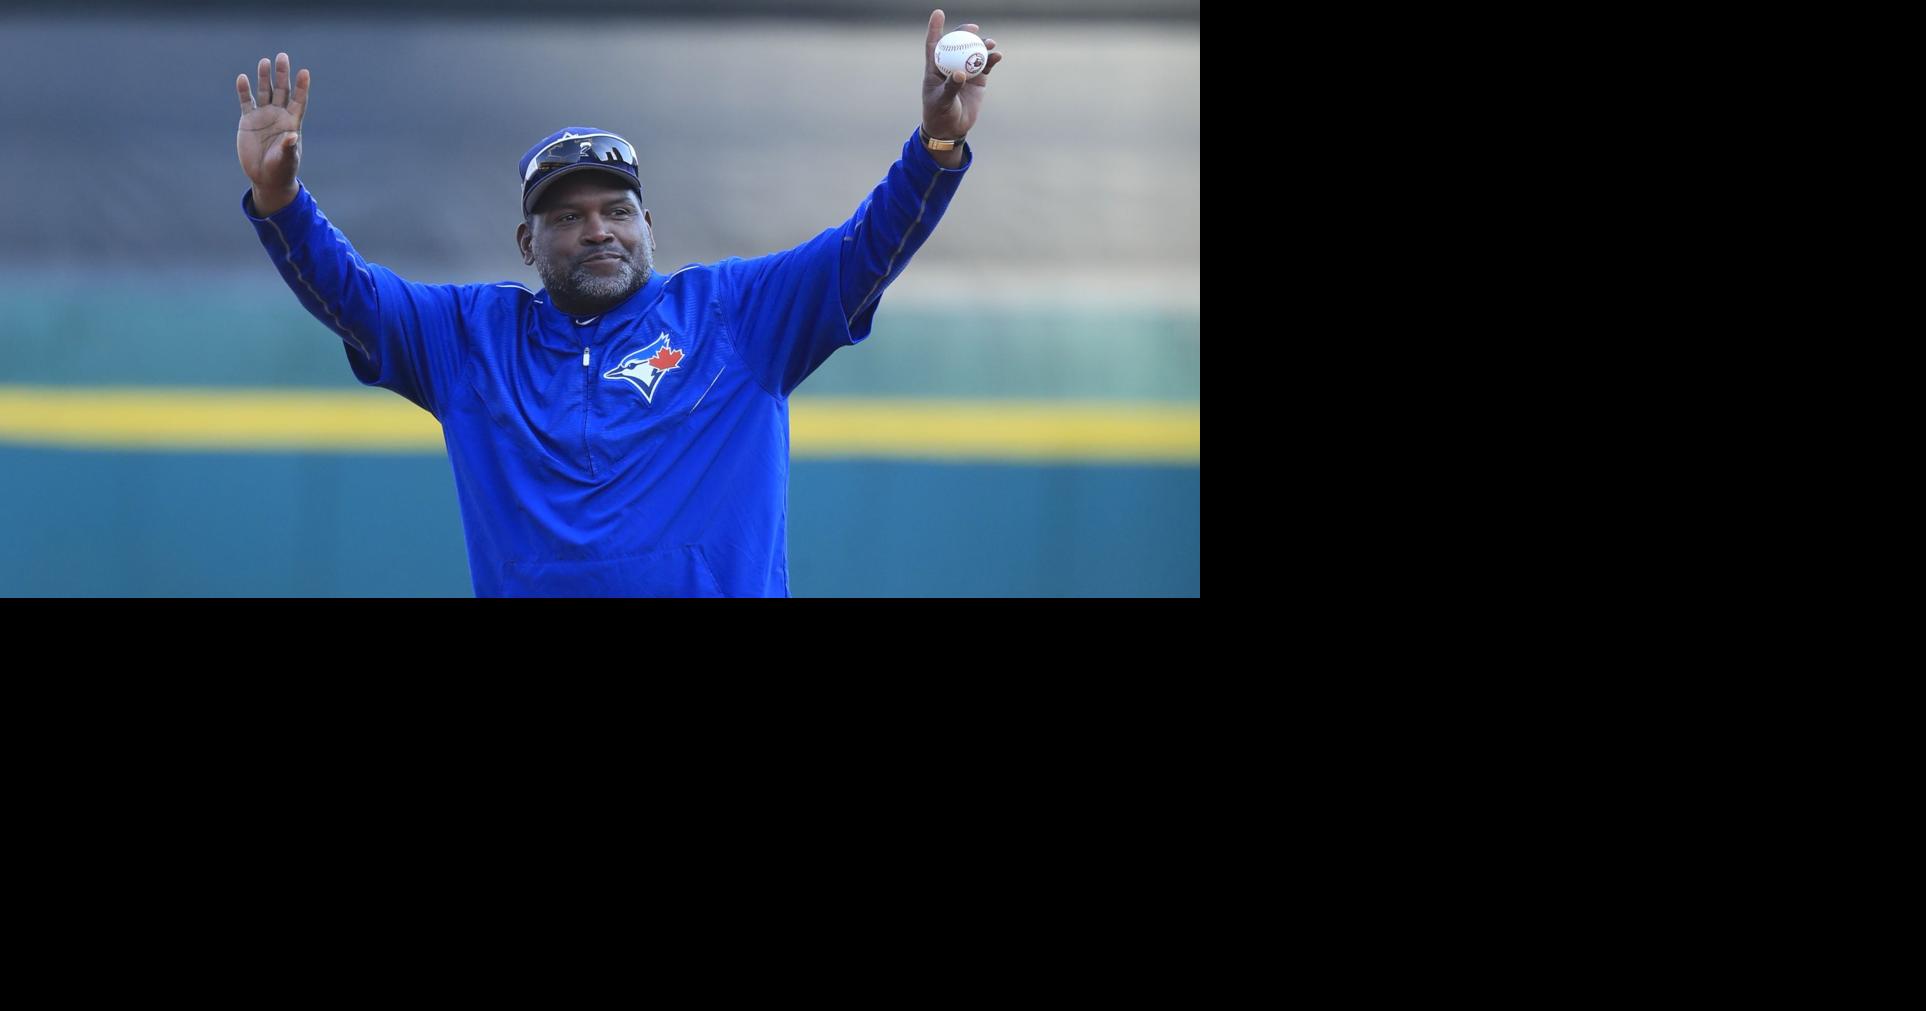 Tim Raines' path to Hall of Fame began as athletic whirlwind in